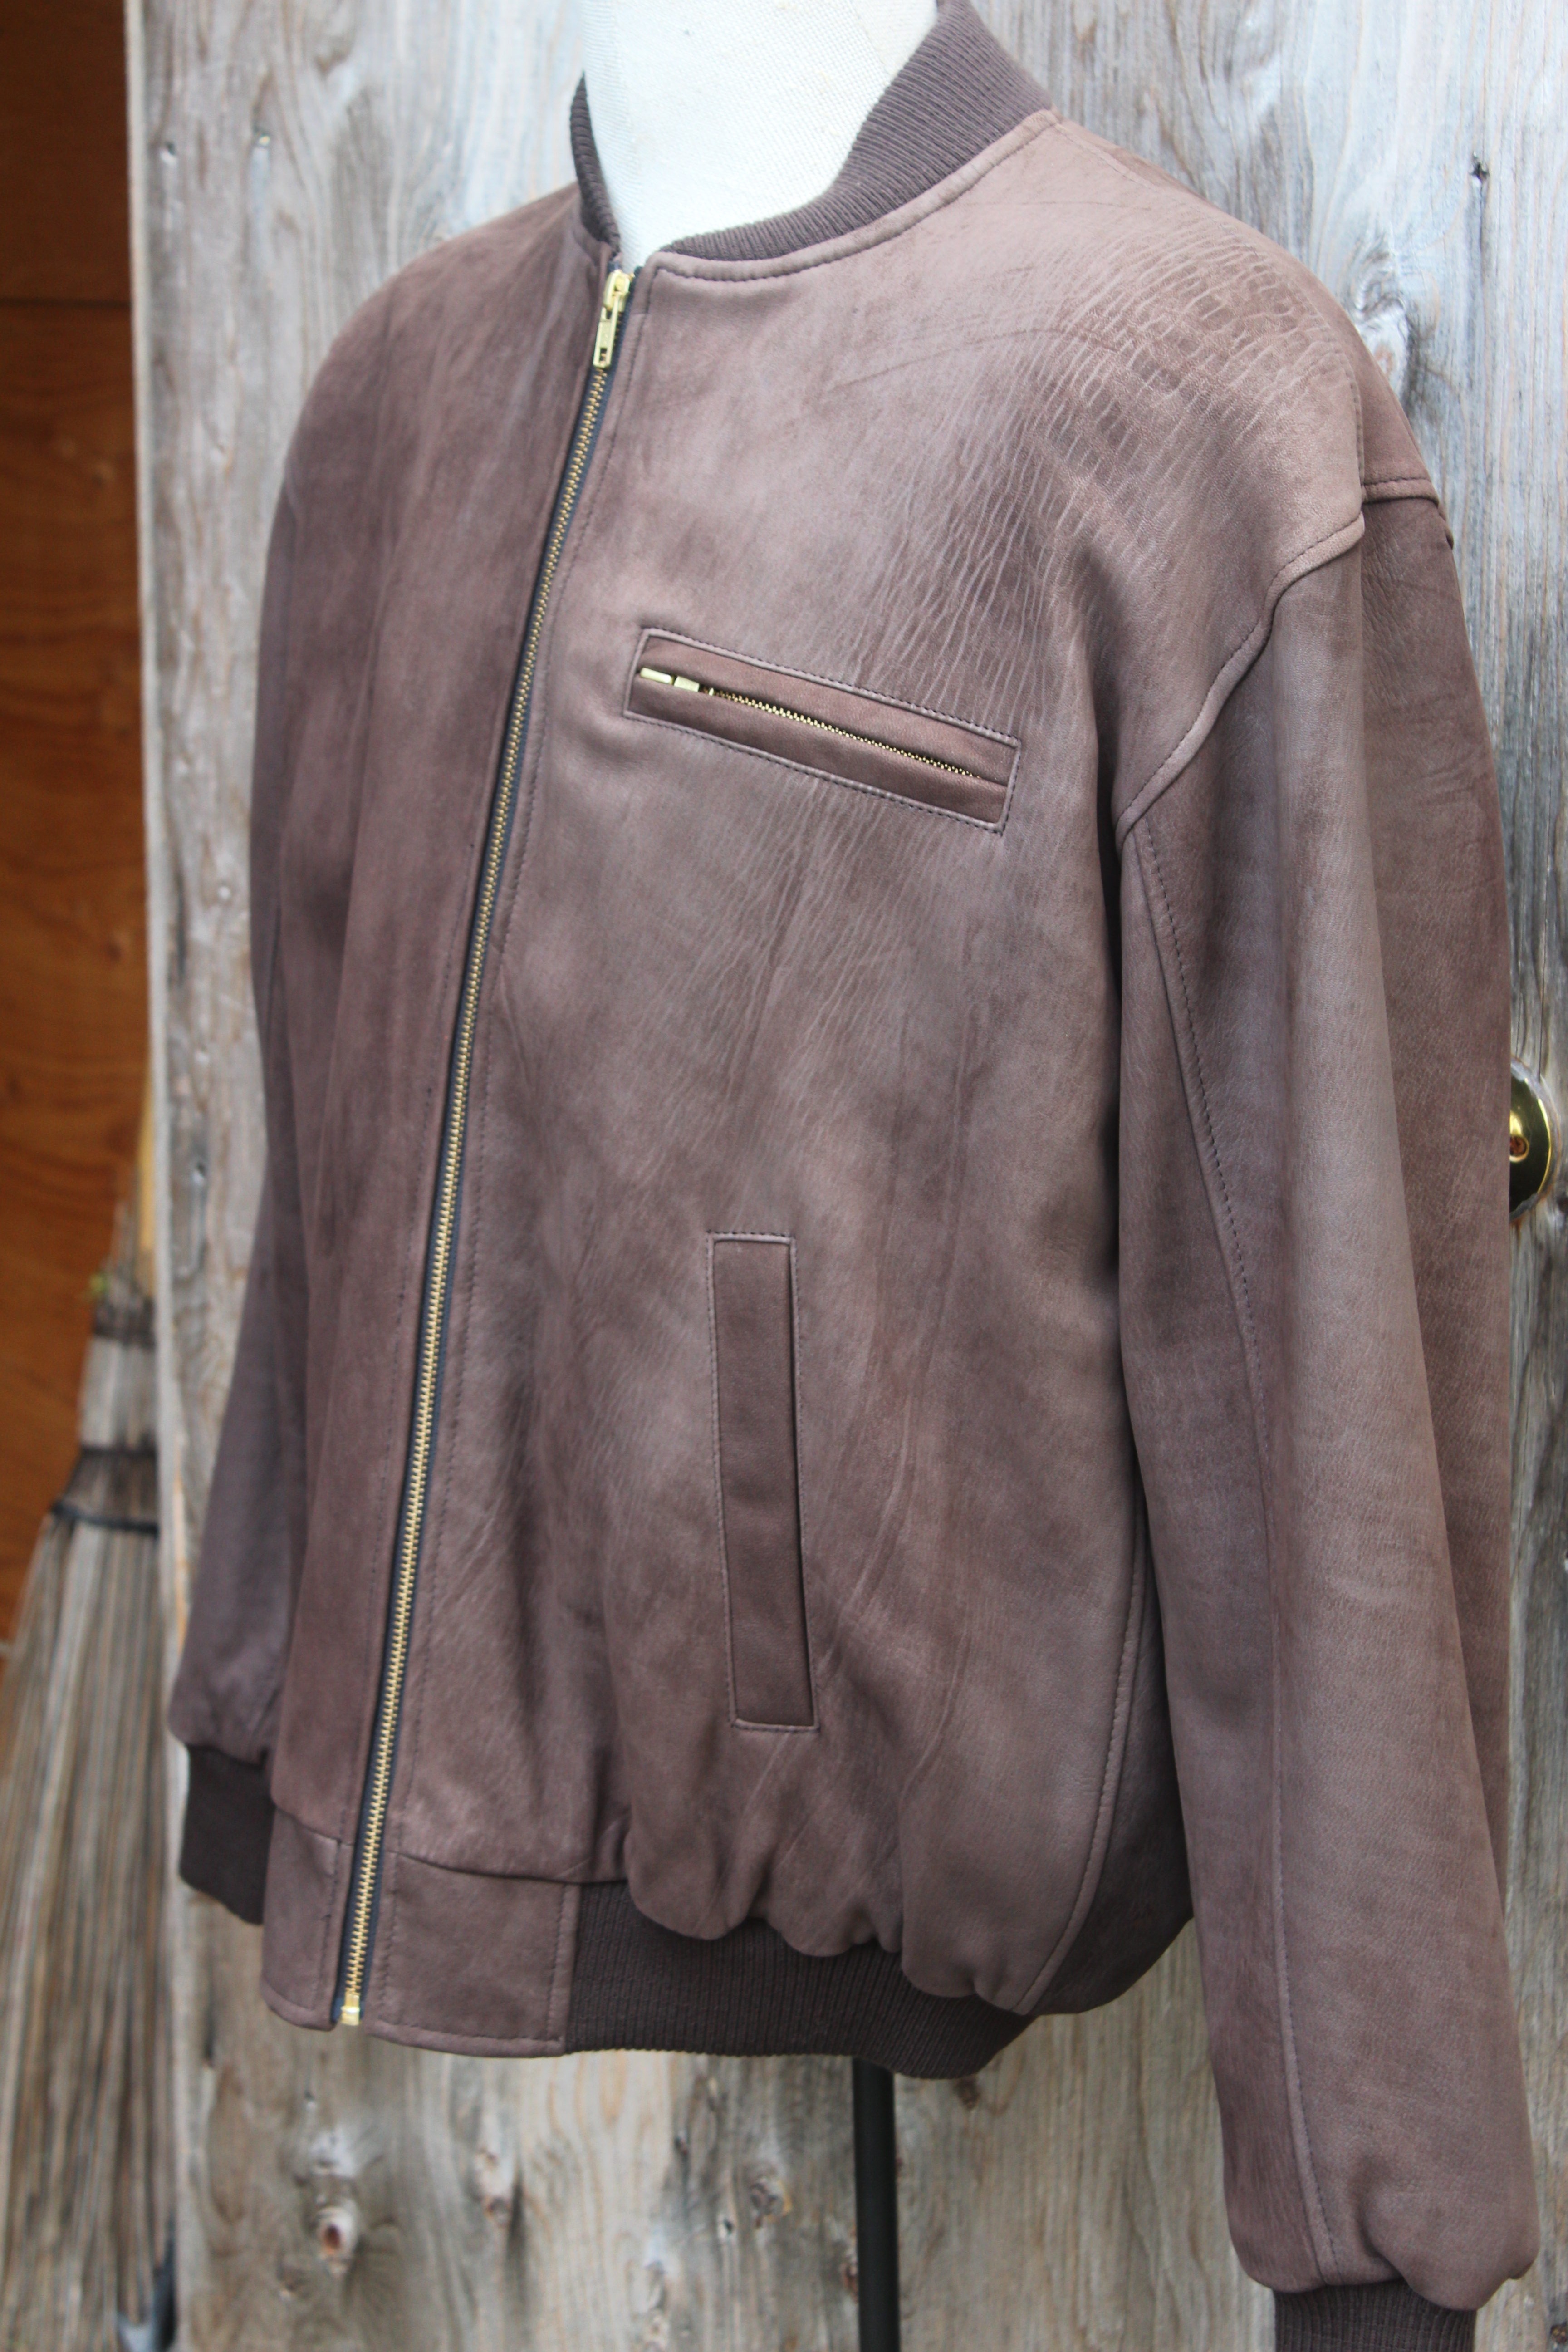 Mens Bomber in Brown, (available in Classic Brown, Classic Black, Naked Black)- $225.00
Bainton's Tannery
Style #: 03

